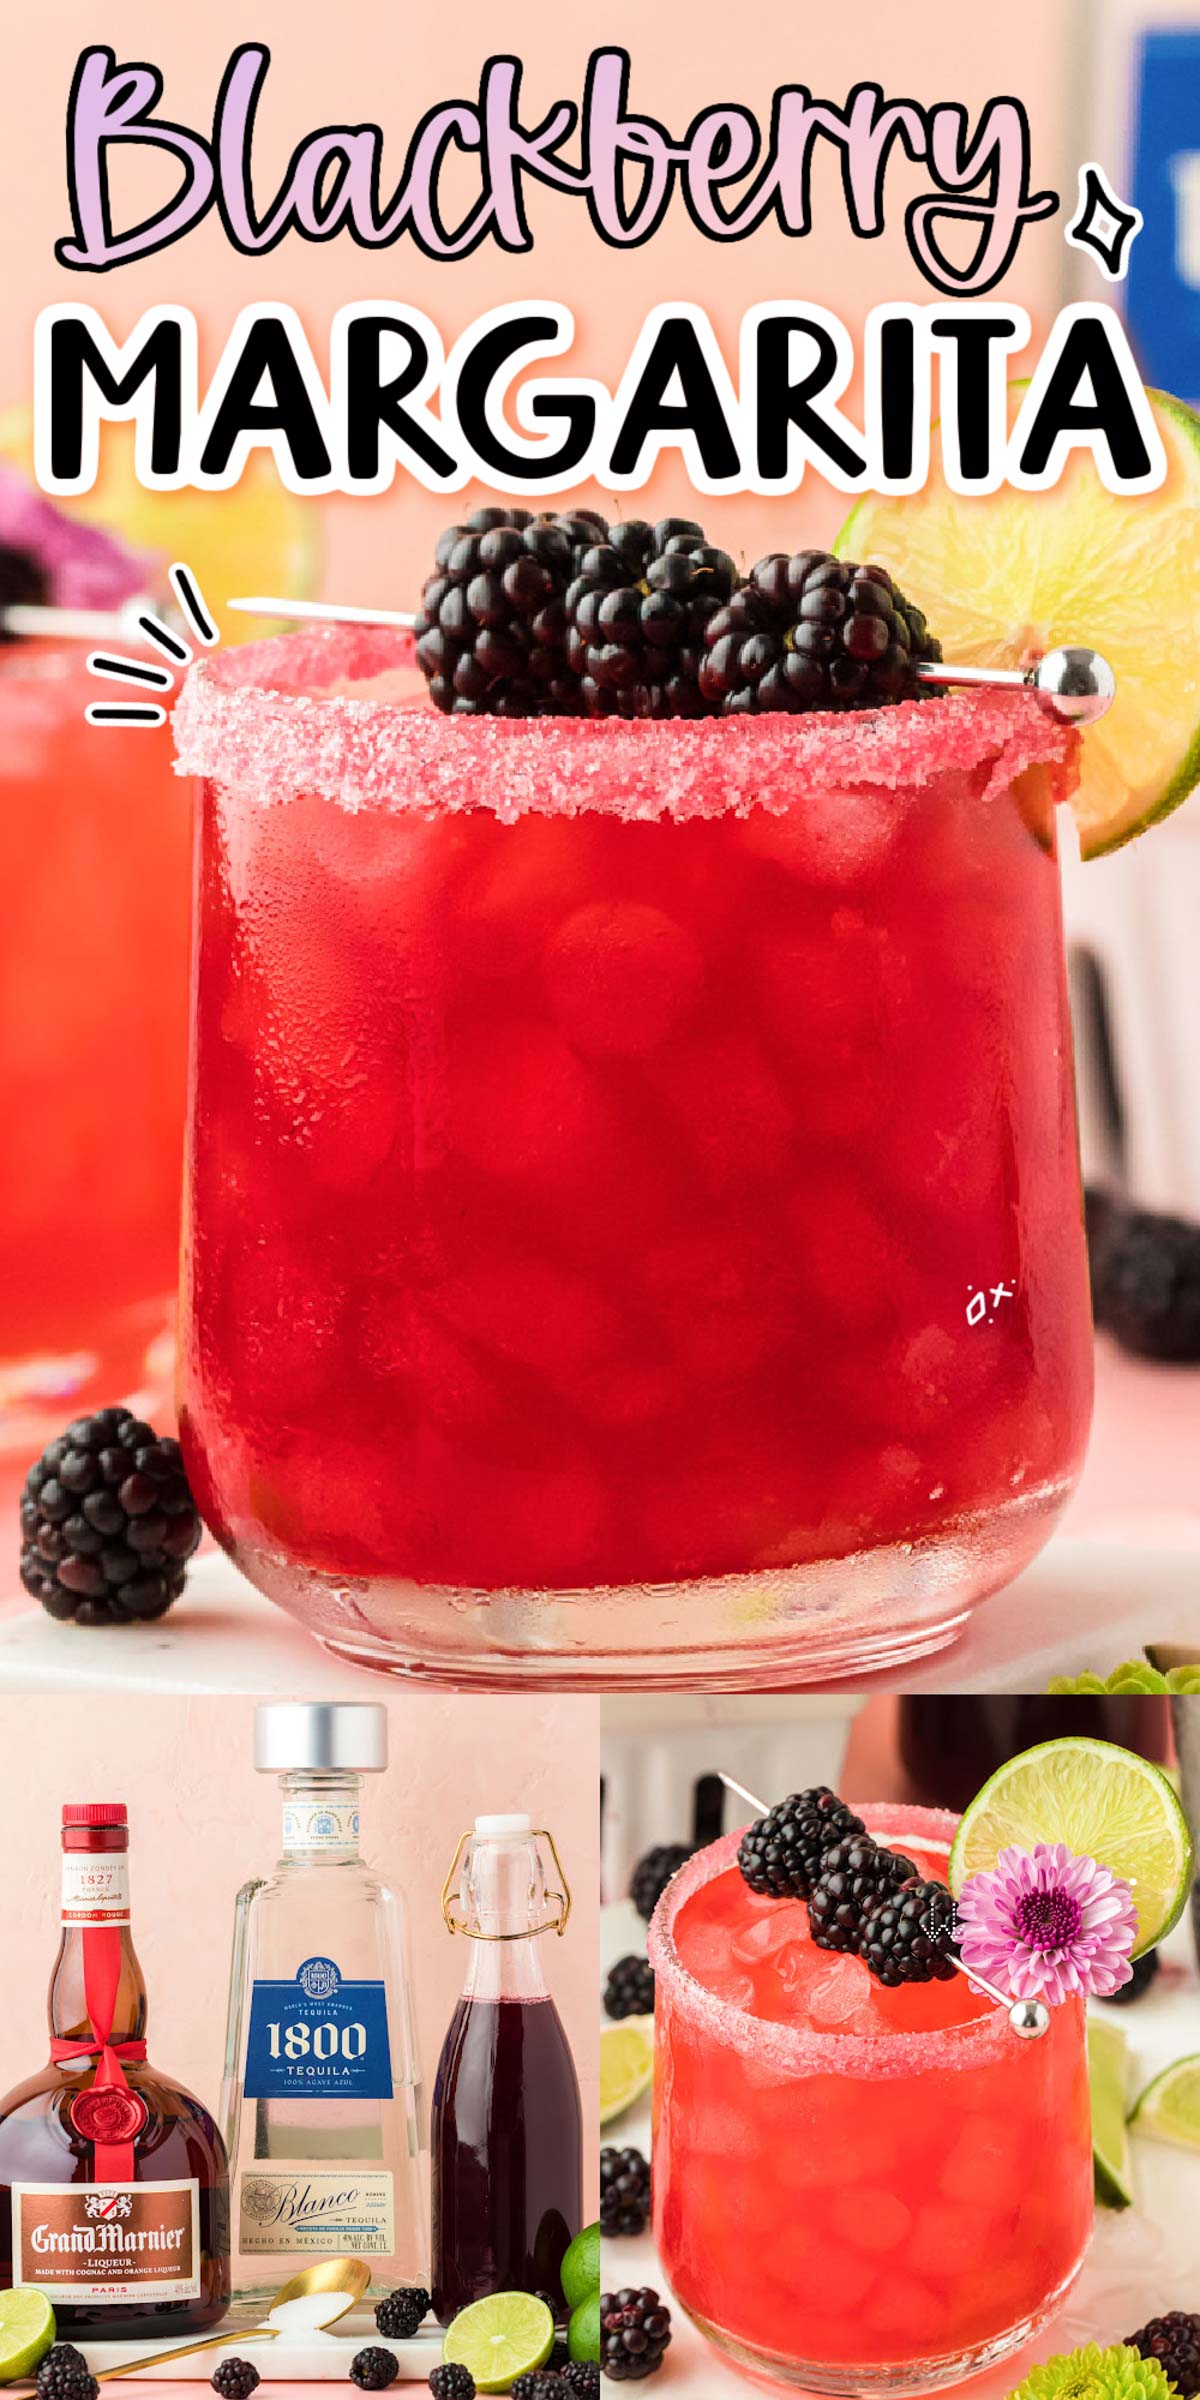 Learn How To Make A Blackberry Margarita On The Rocks in 5 minutes using tequila, orange liqueur, lime juice, and blackberry simple syrup! via @sugarandsoulco